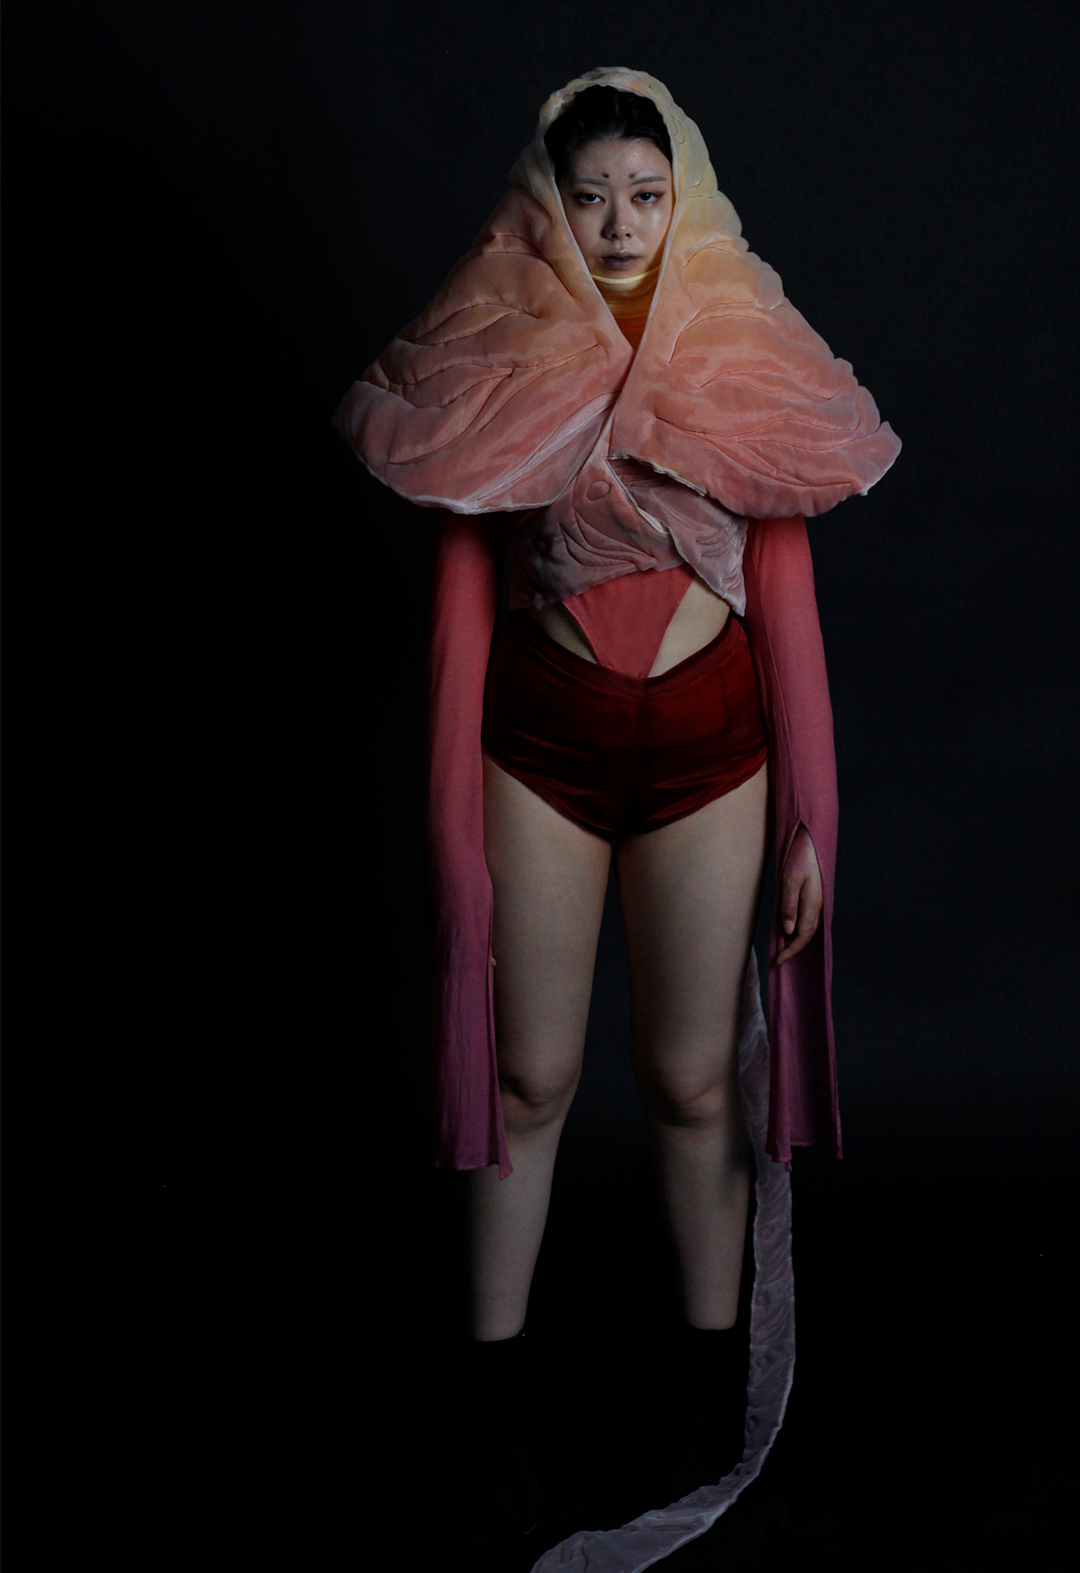 The photo shows a front view of the model in an ombre-colored cape and knit top, matched with silk mini shorts. The cape is made with a zero-waste pattern.